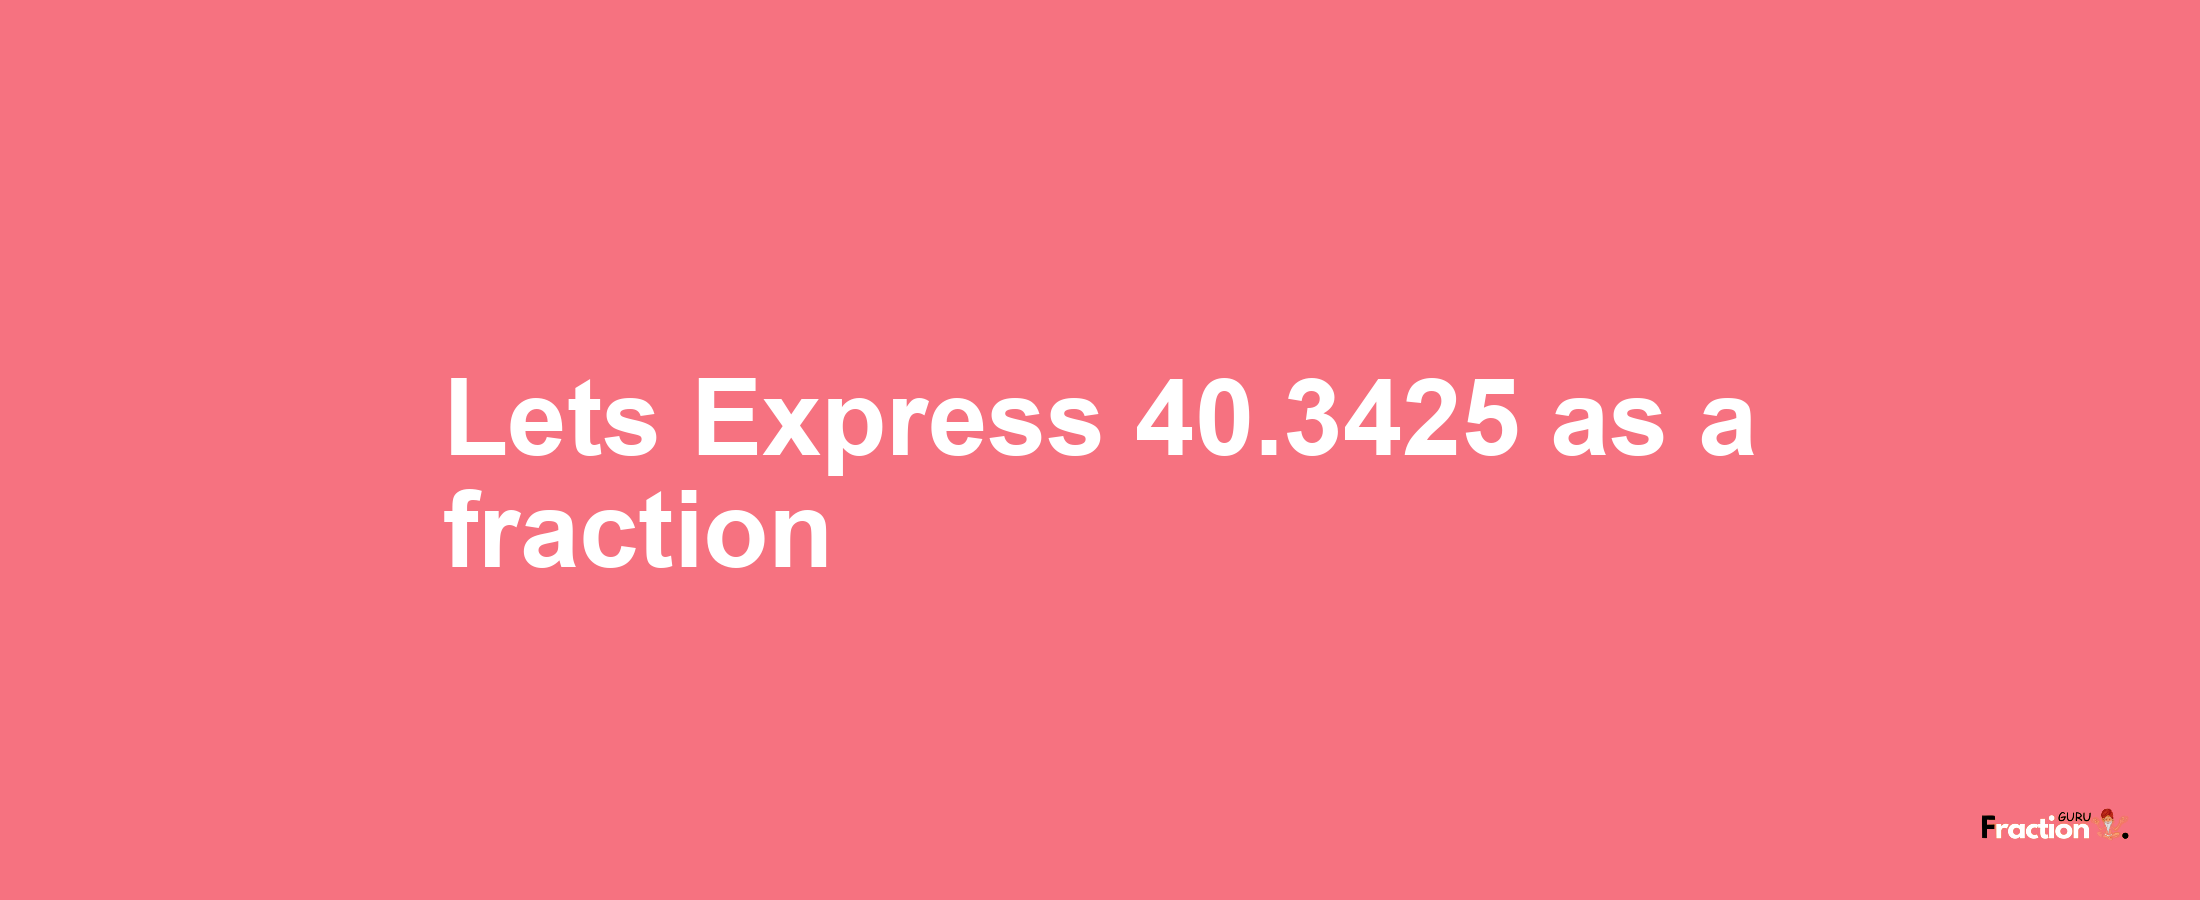 Lets Express 40.3425 as afraction